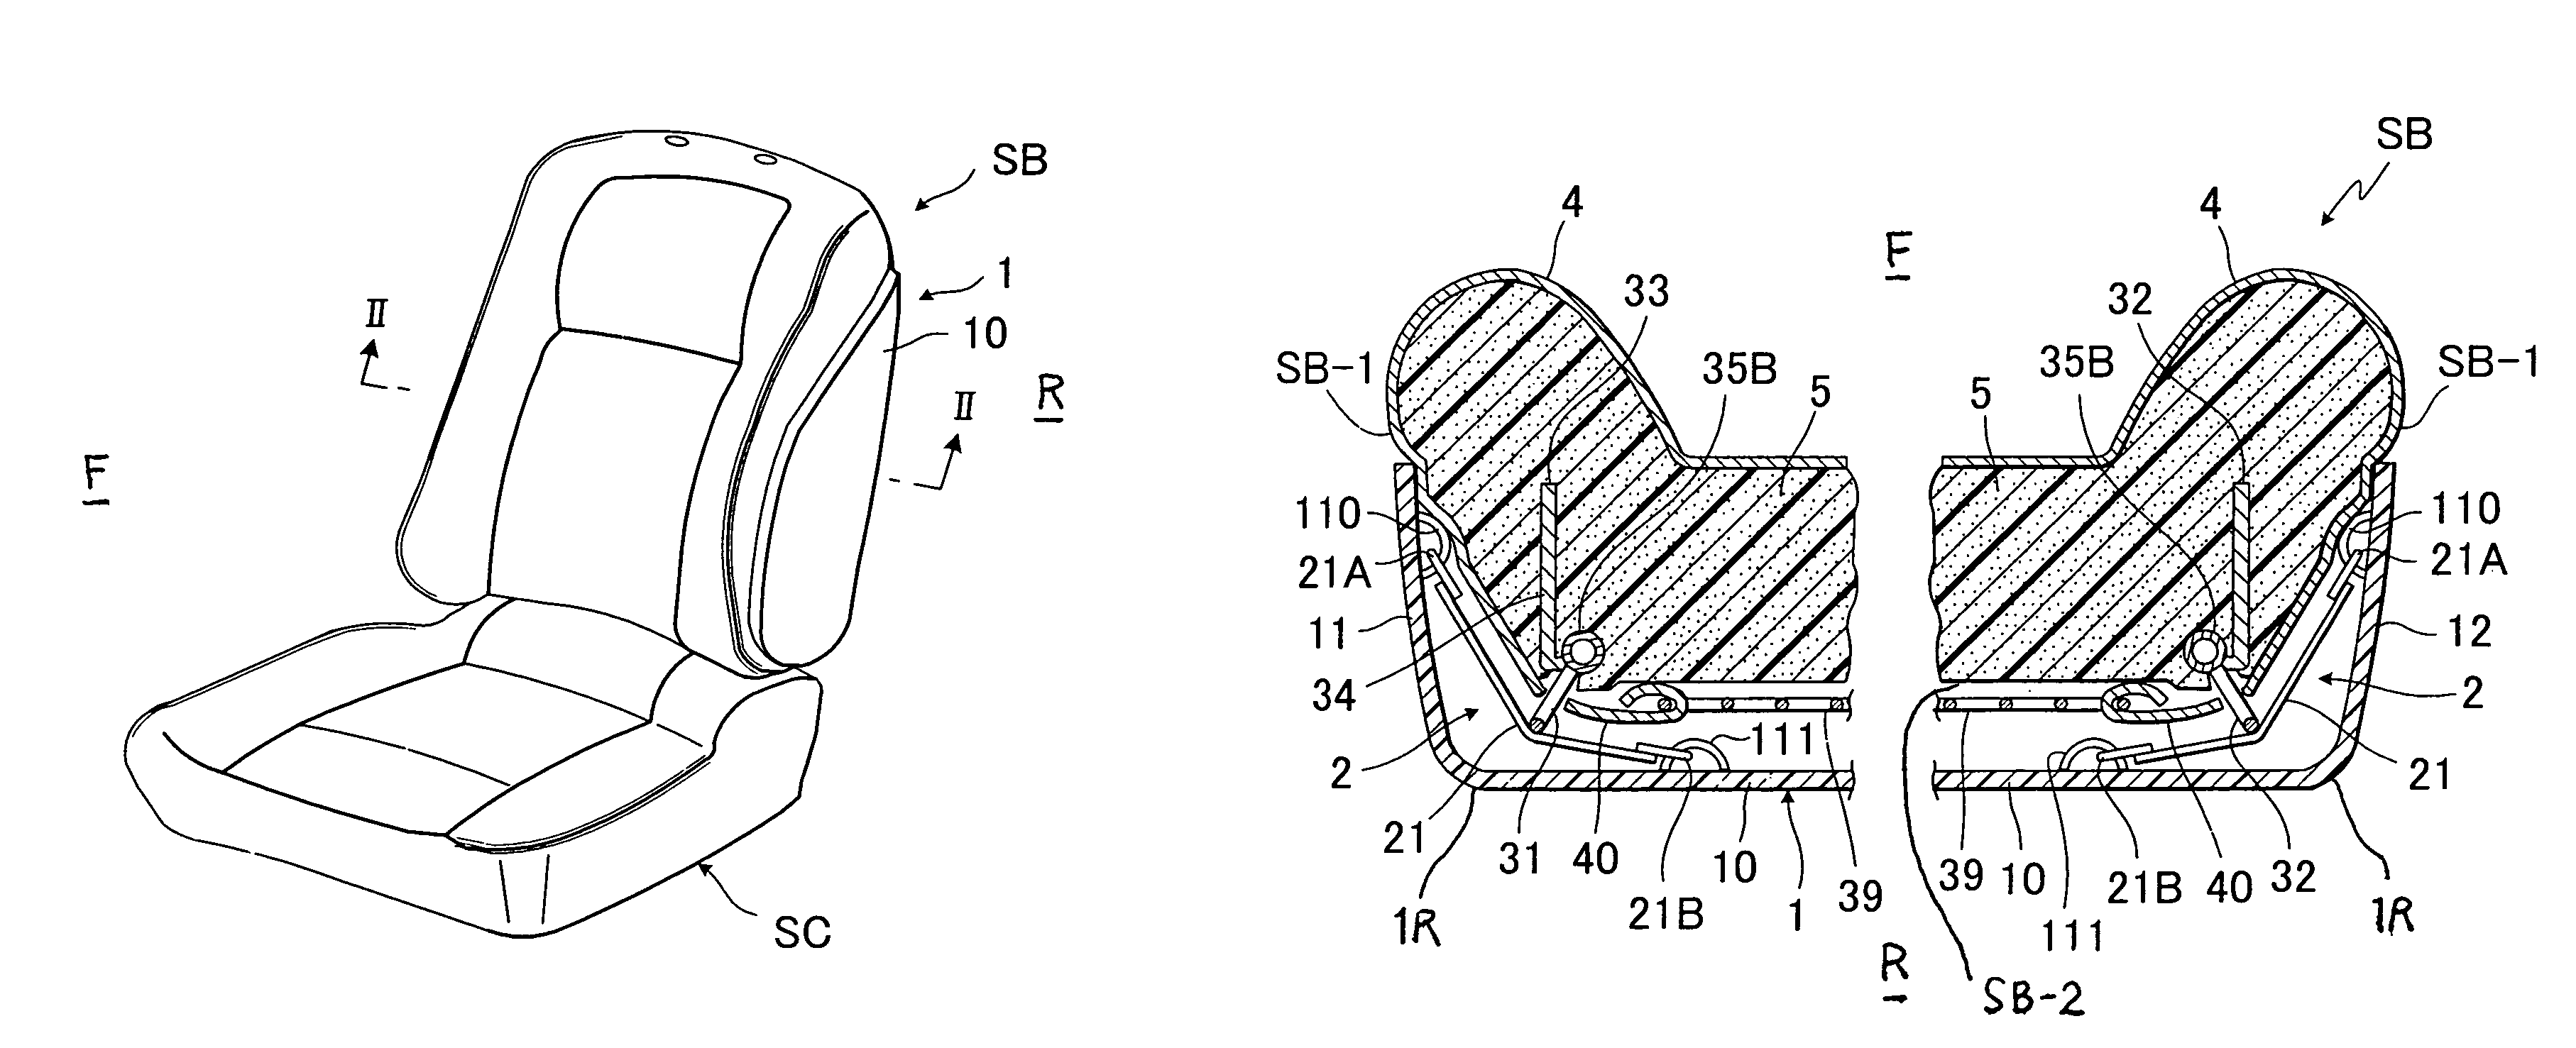 Seat back of automotive seat with back board